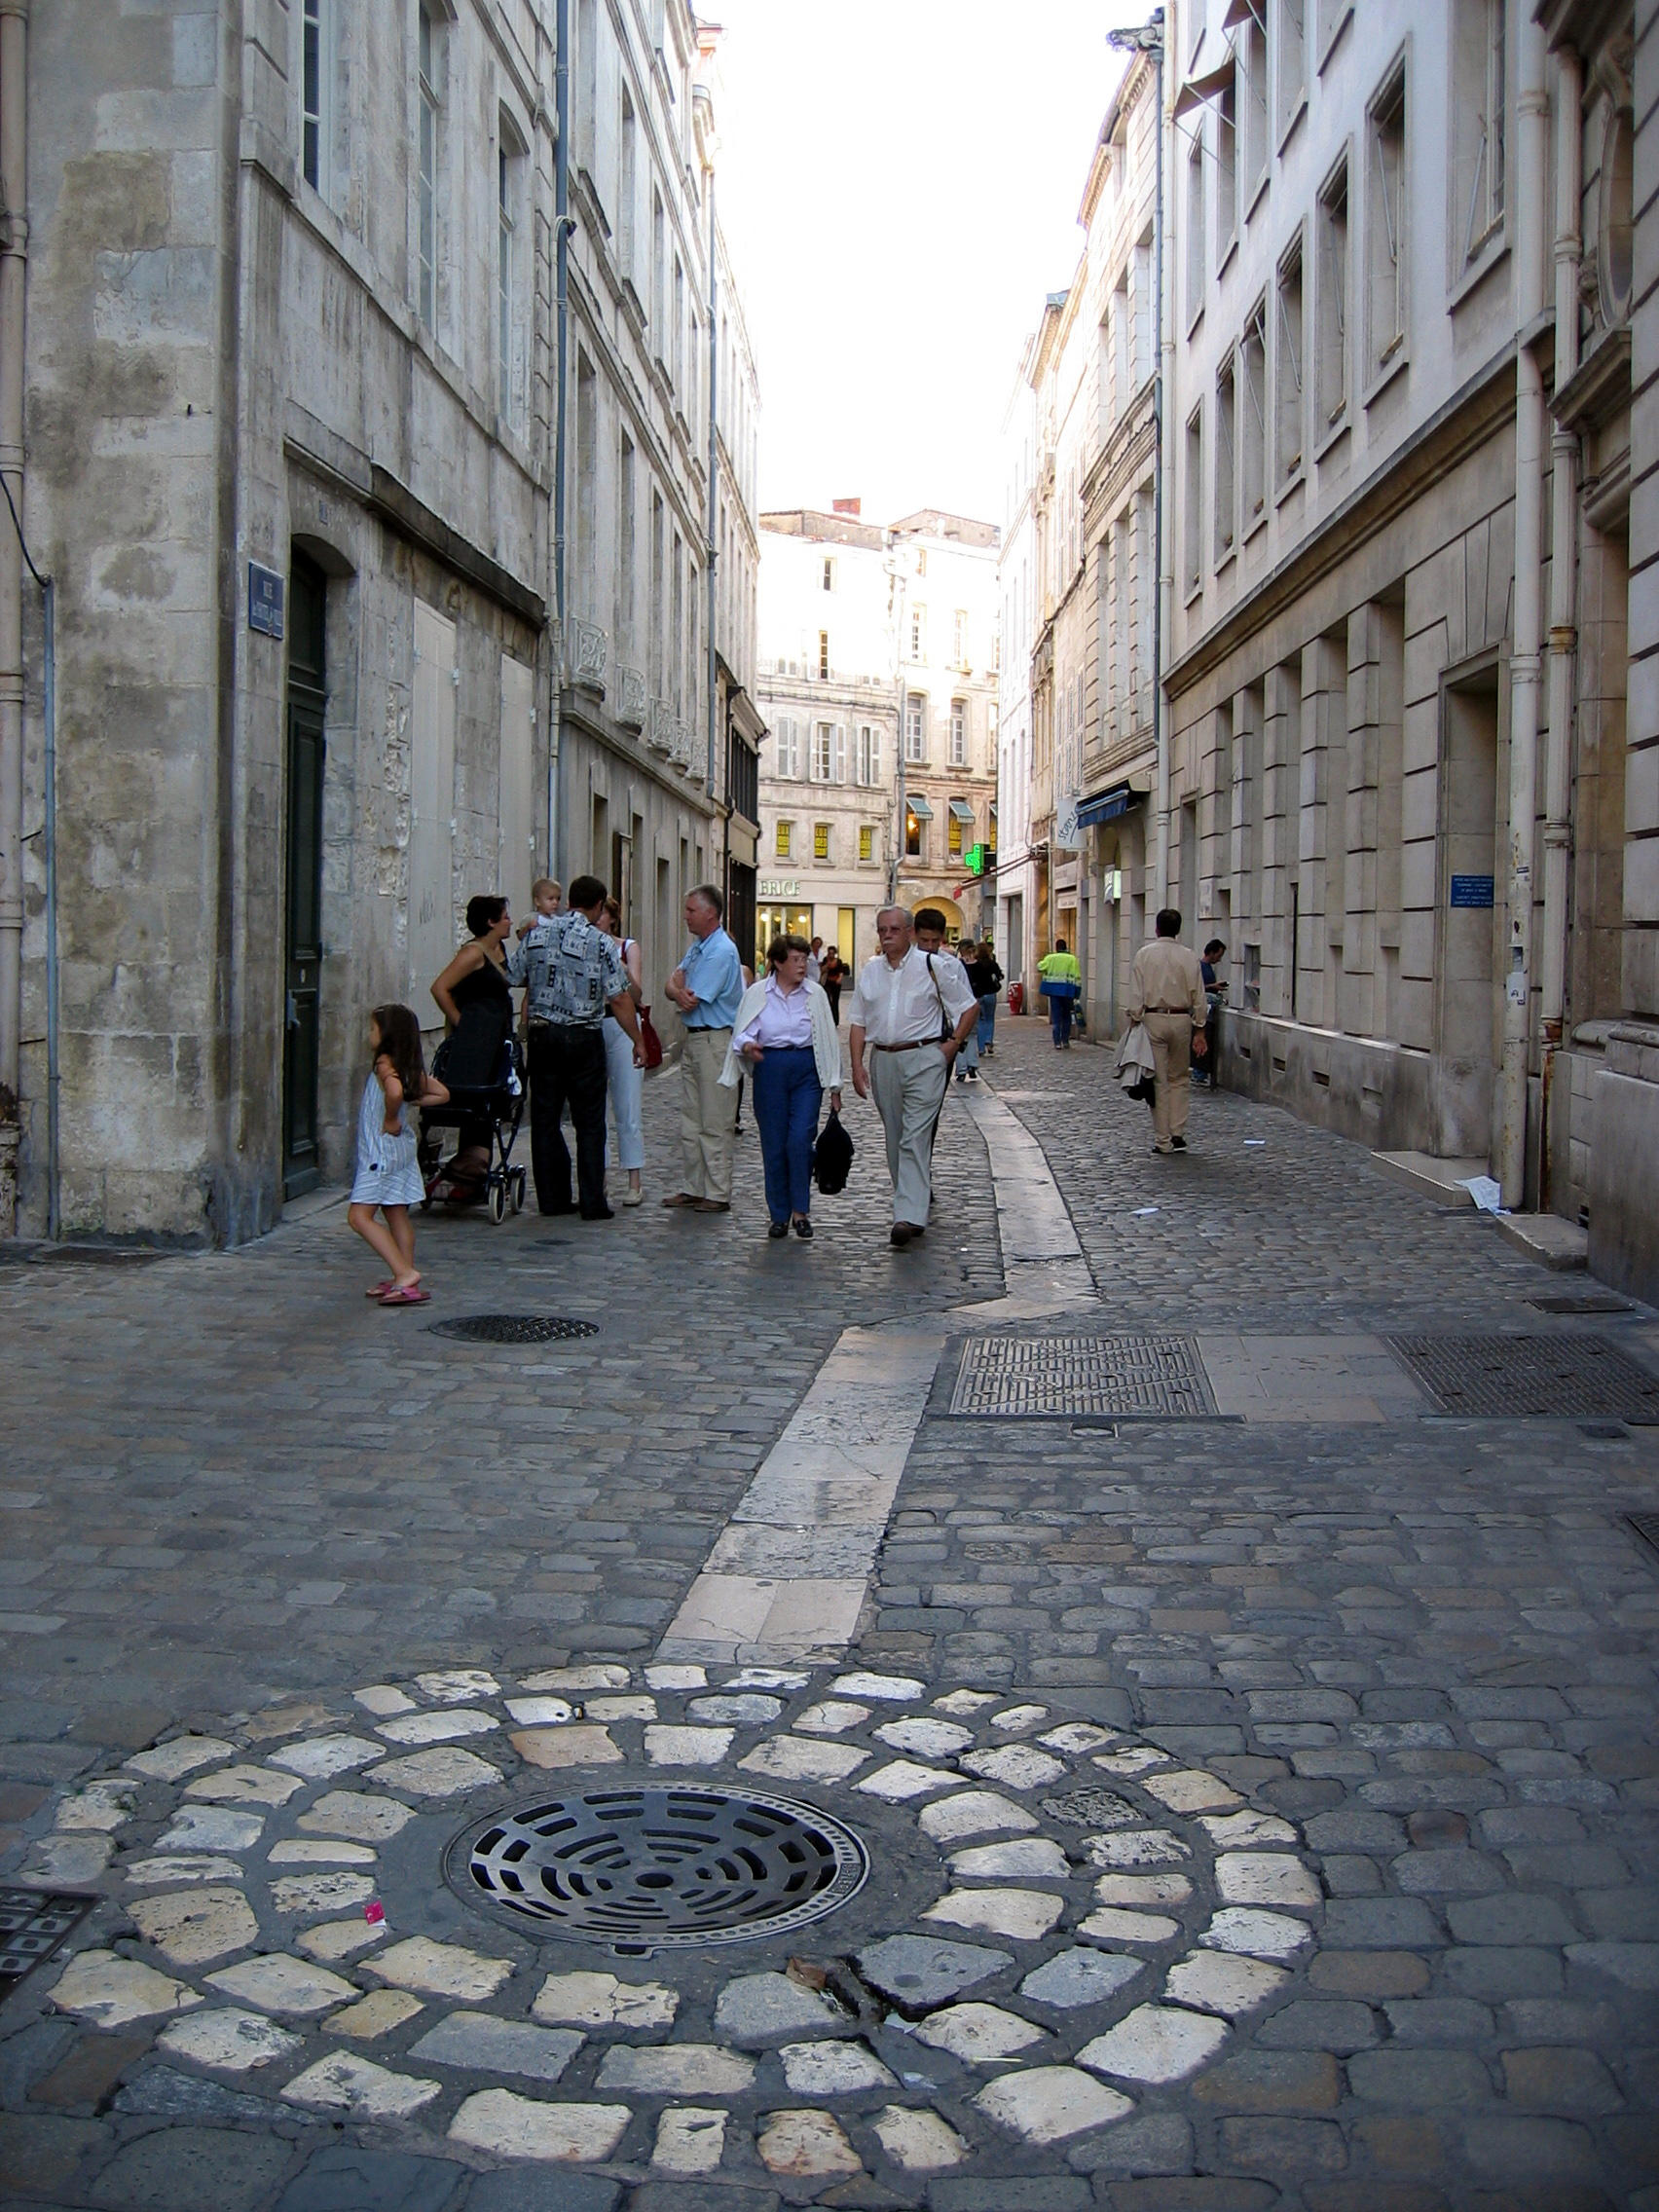 One of our own photos of a street in La Rochelle, France. Imagine ...